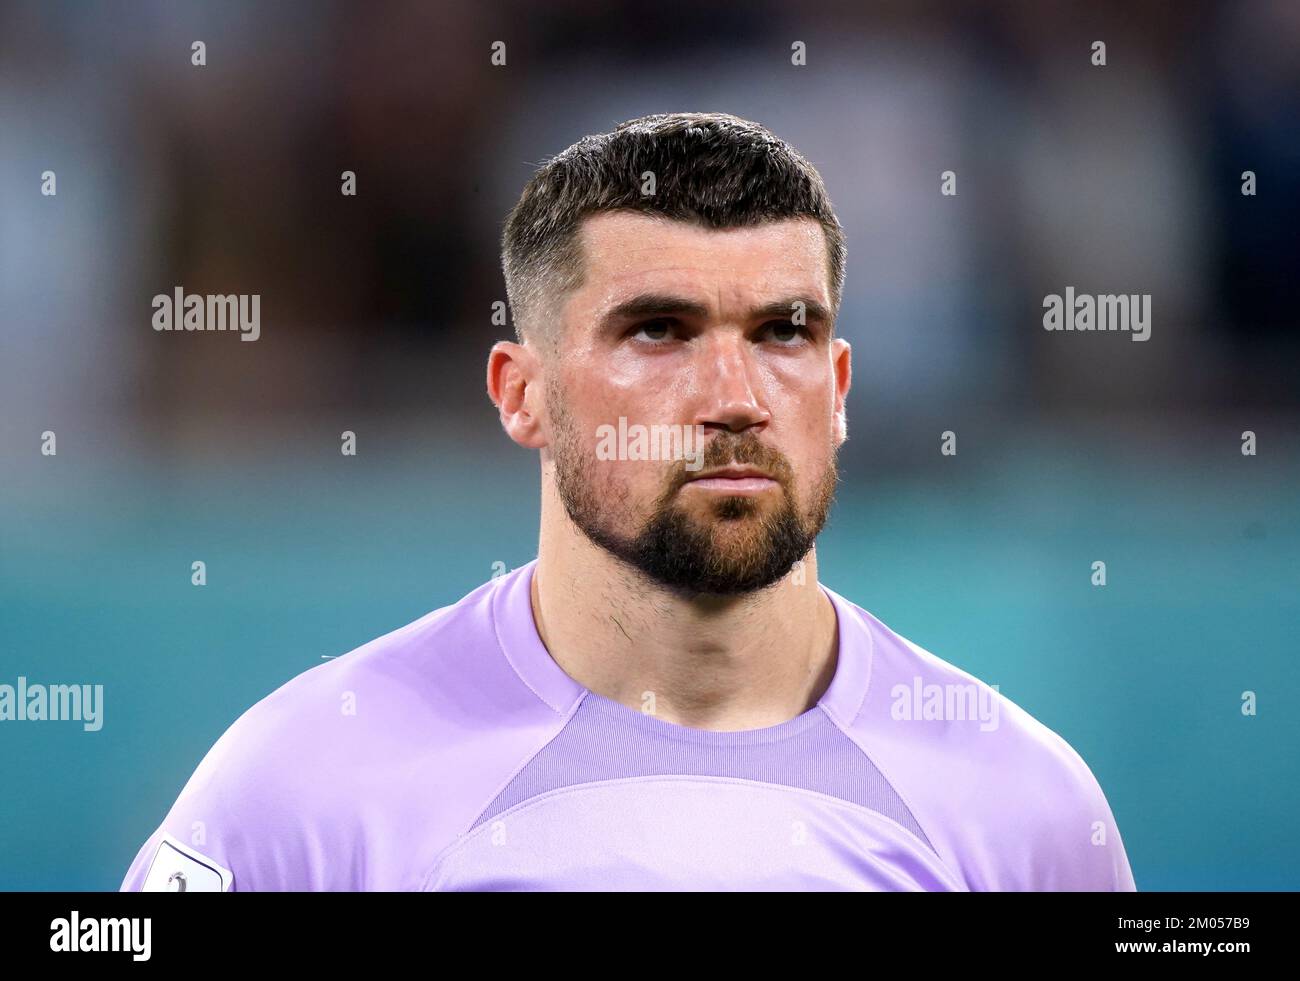 Australia goalkeeper Mathew Ryan lines up on the pitch ahead of the FIFA World Cup round of 16 match at the Ahmad Bin Ali Stadium in Al Rayyan, Qatar. Picture date: Saturday December 3, 2022. Stock Photo